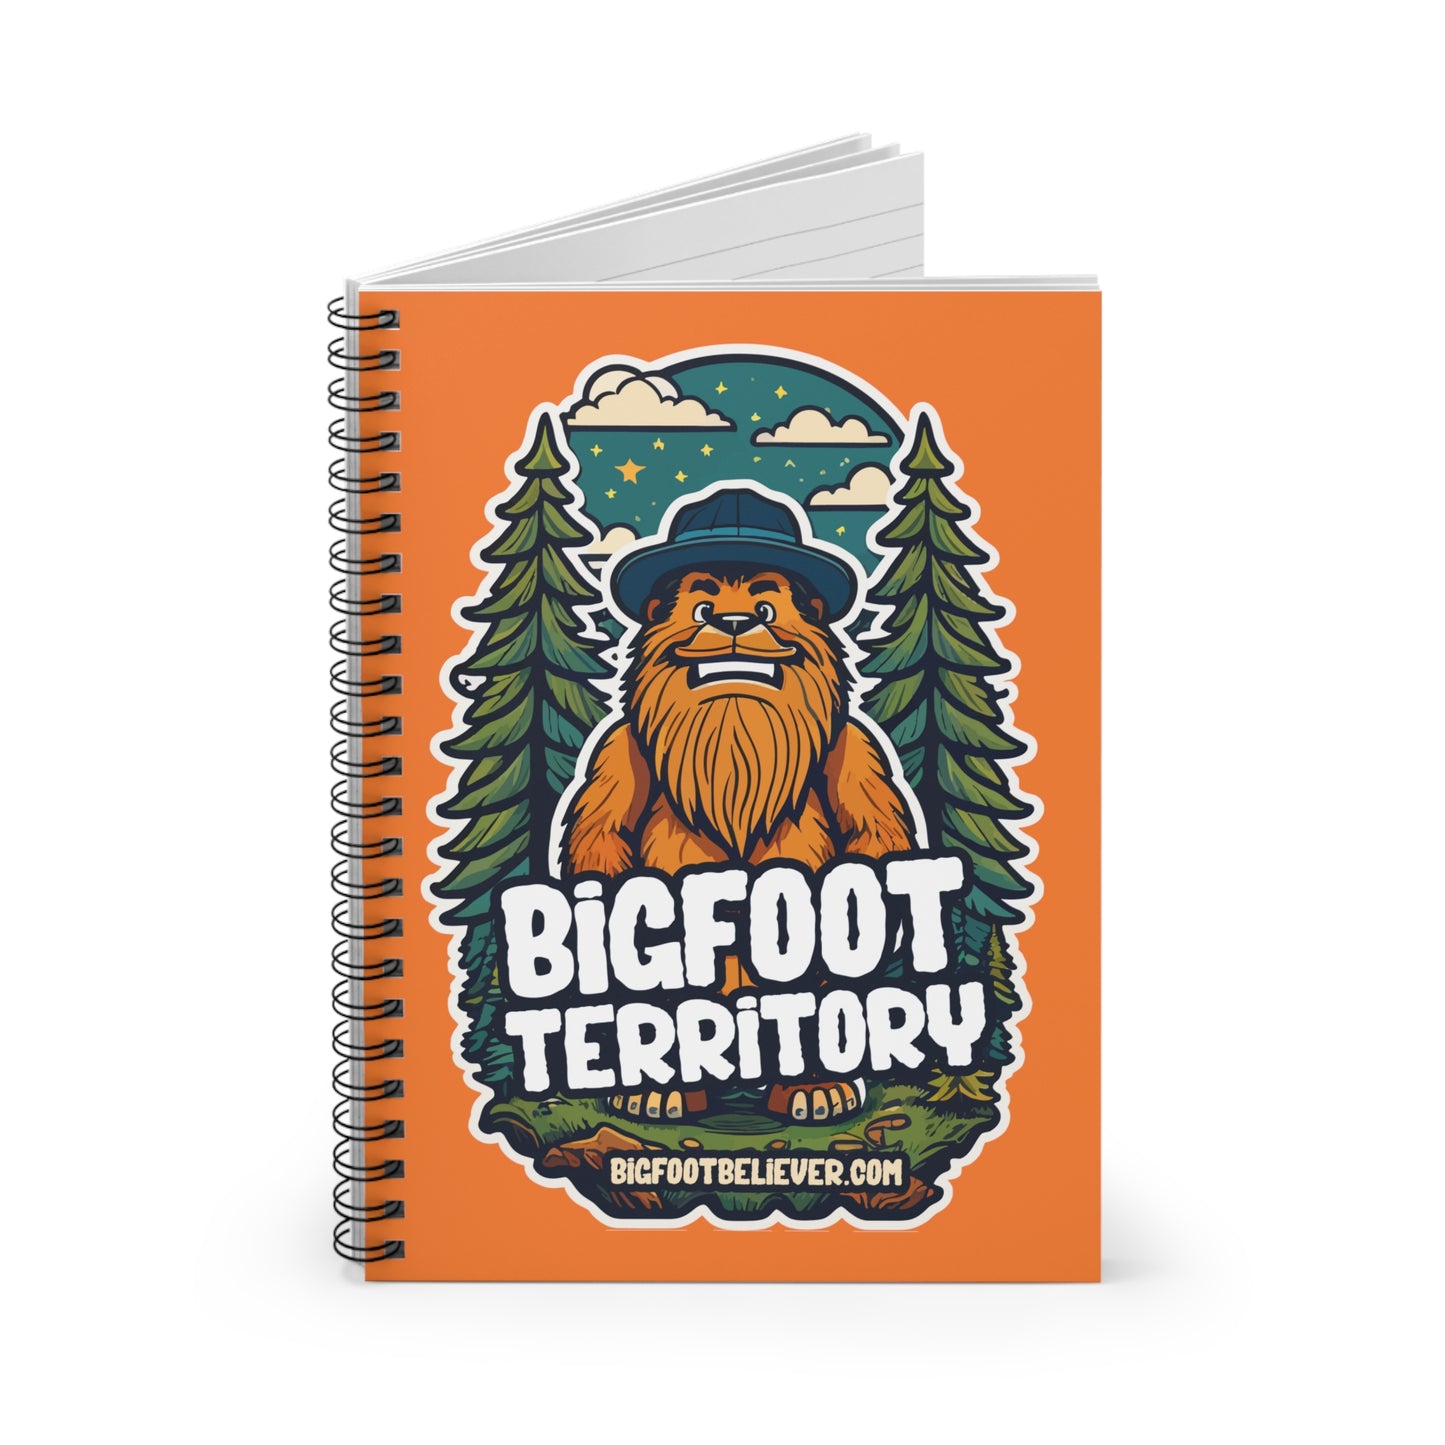 Bigfoot Territory ll Spiral Notebook - Ruled Line